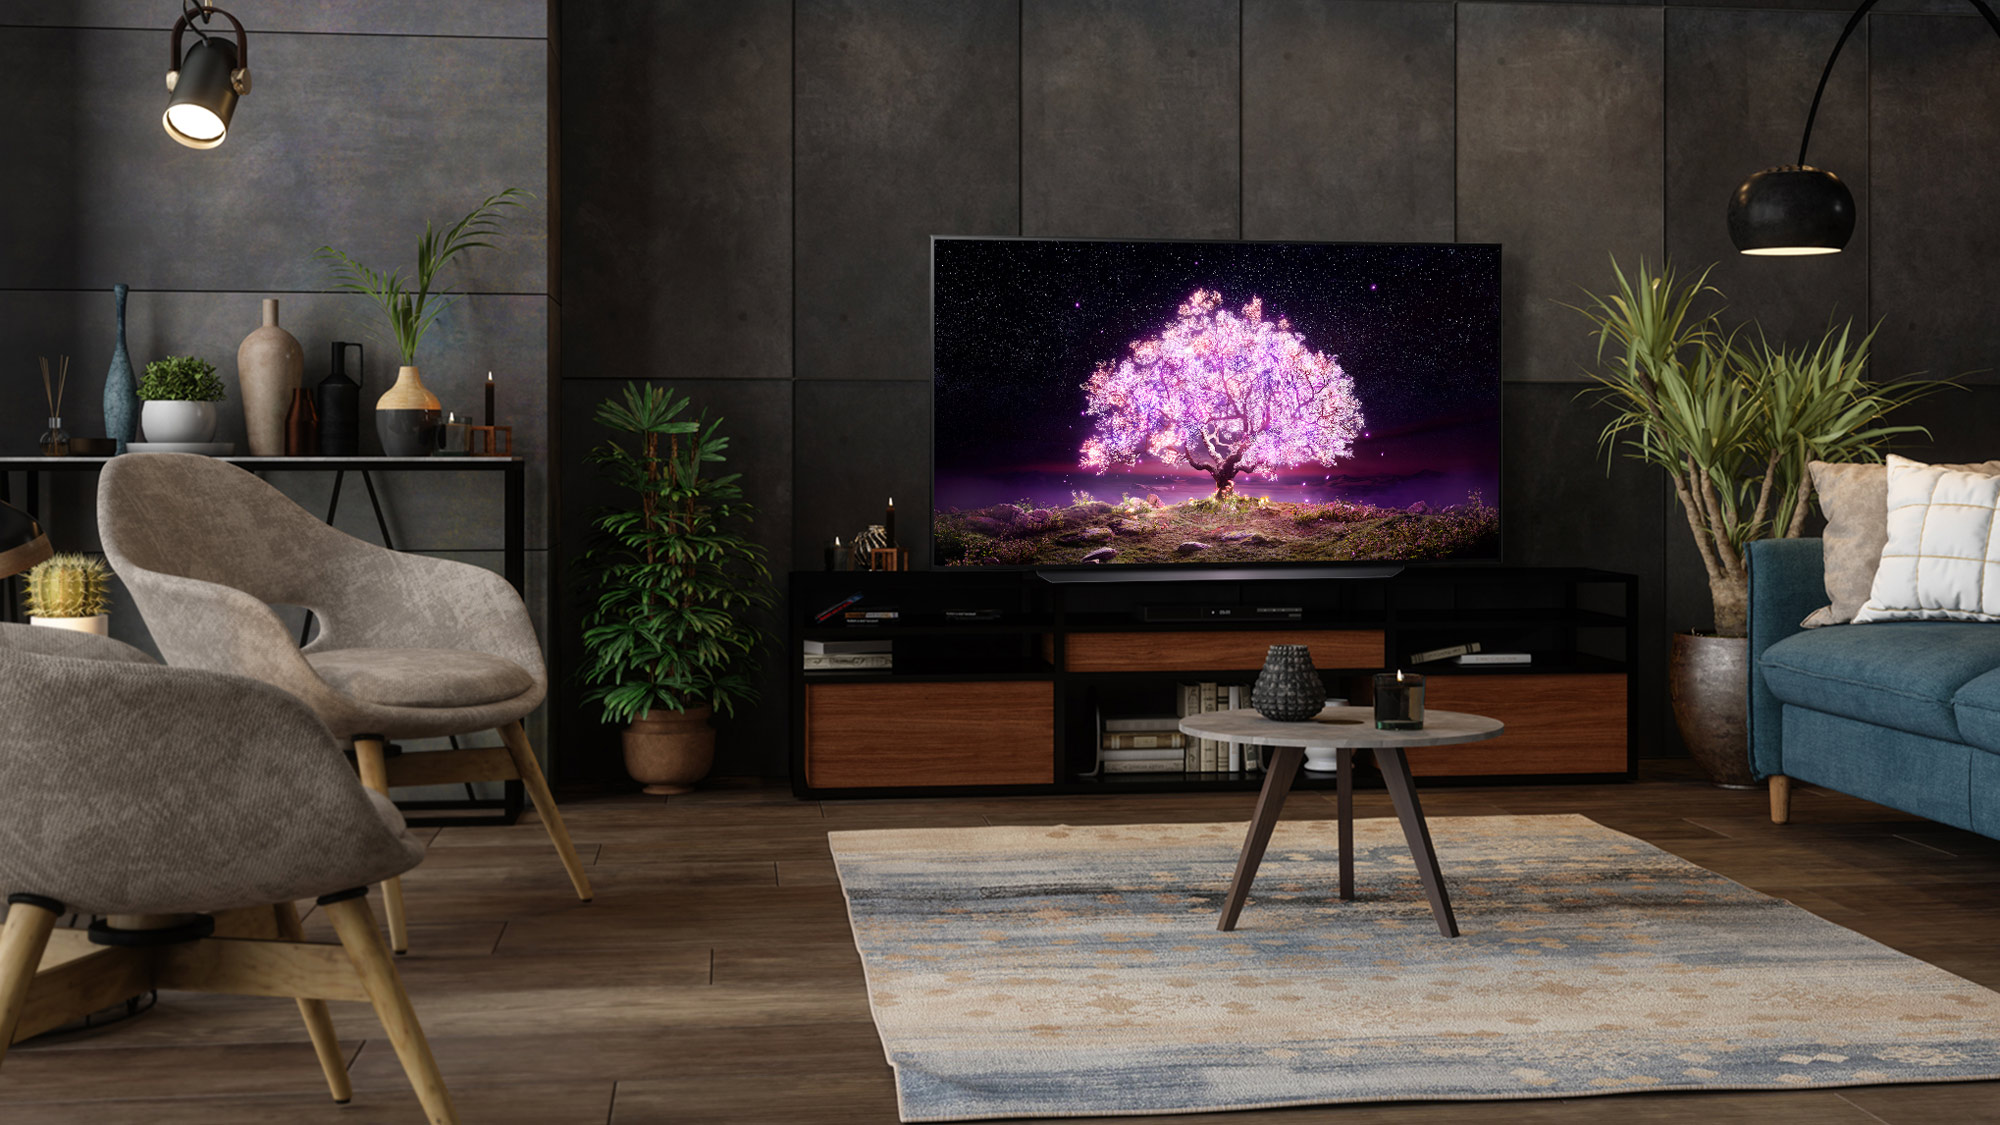 LG C1 OLED vs CX OLED: Which TV Should You Buy?